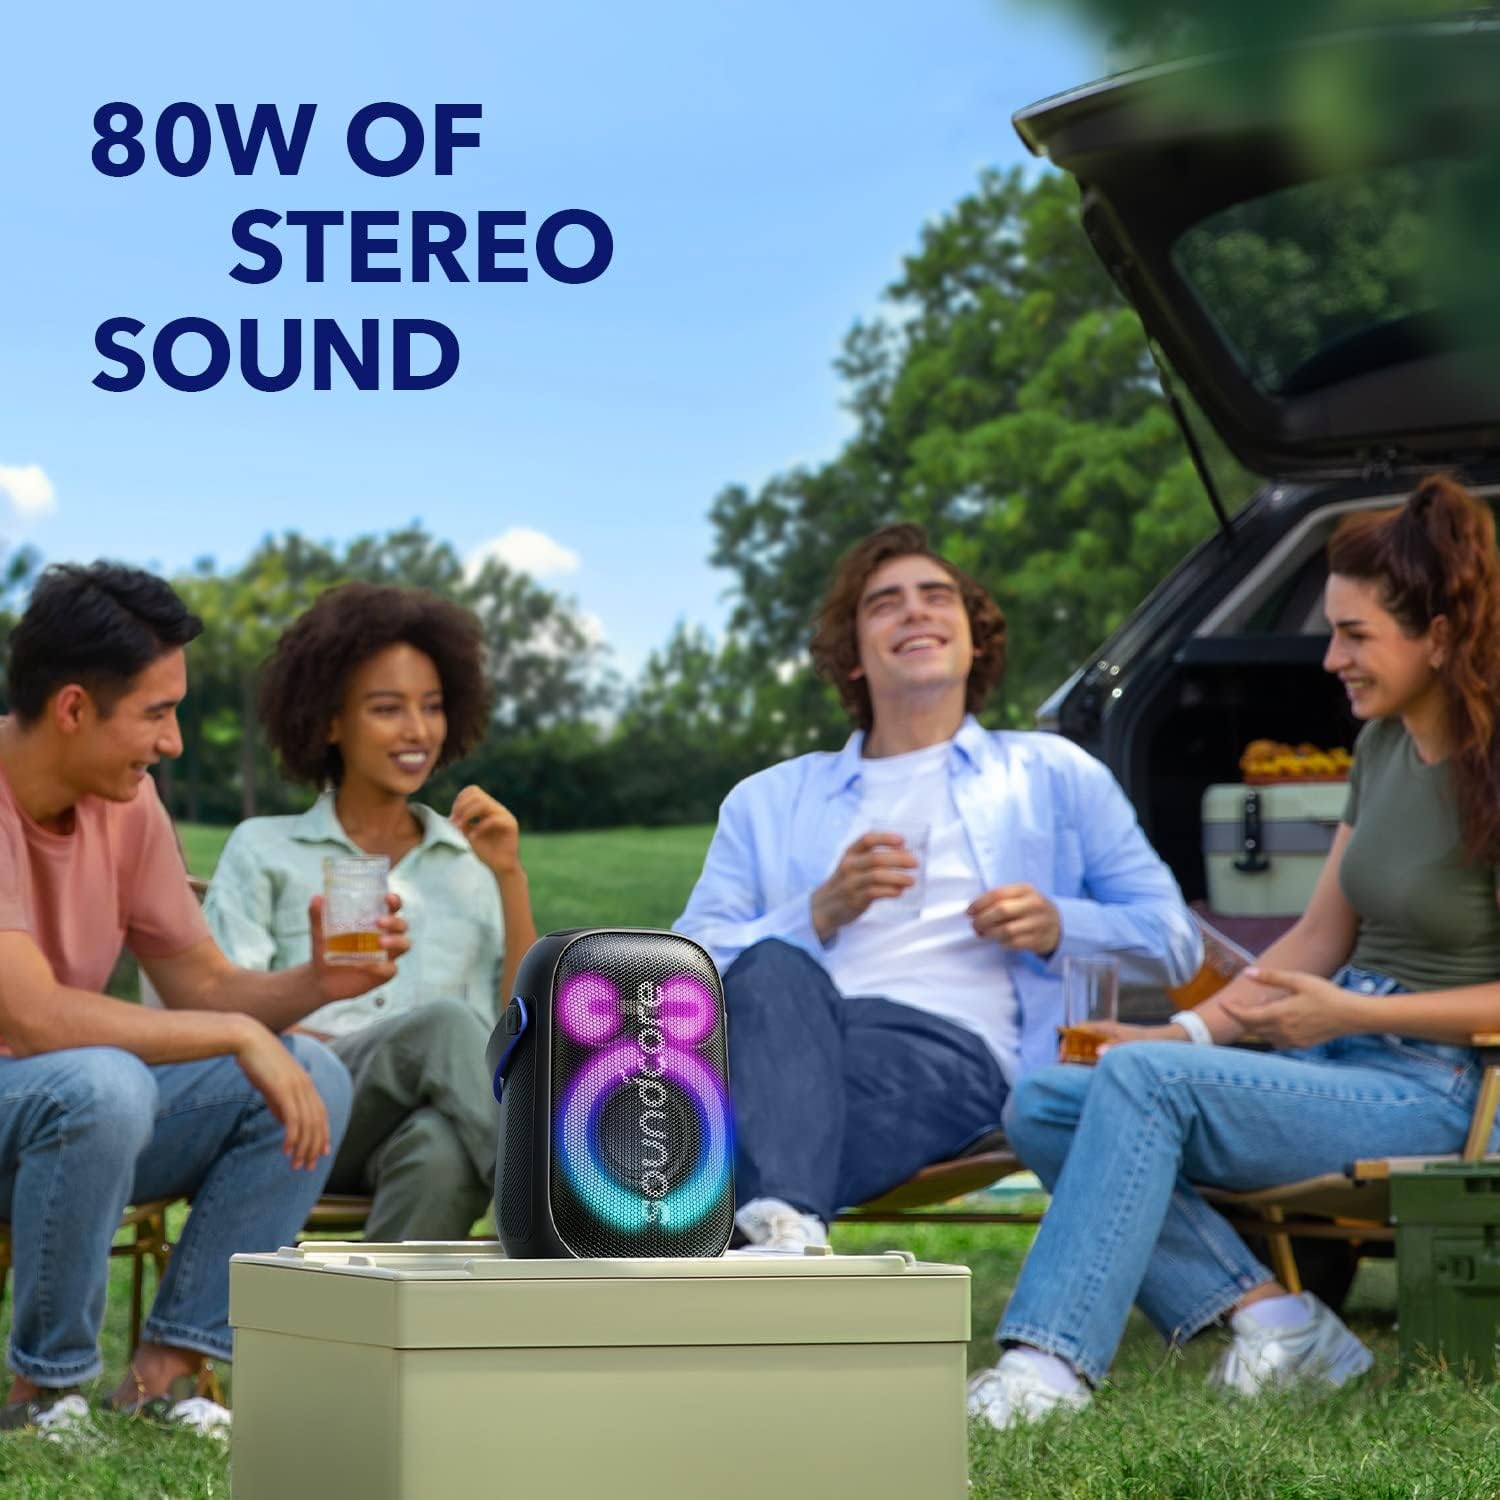 Anker Soundcore Rave Neo 2 Black - Sync over 100 speakers with PartyCast 2.0, light show feature 0194644097943